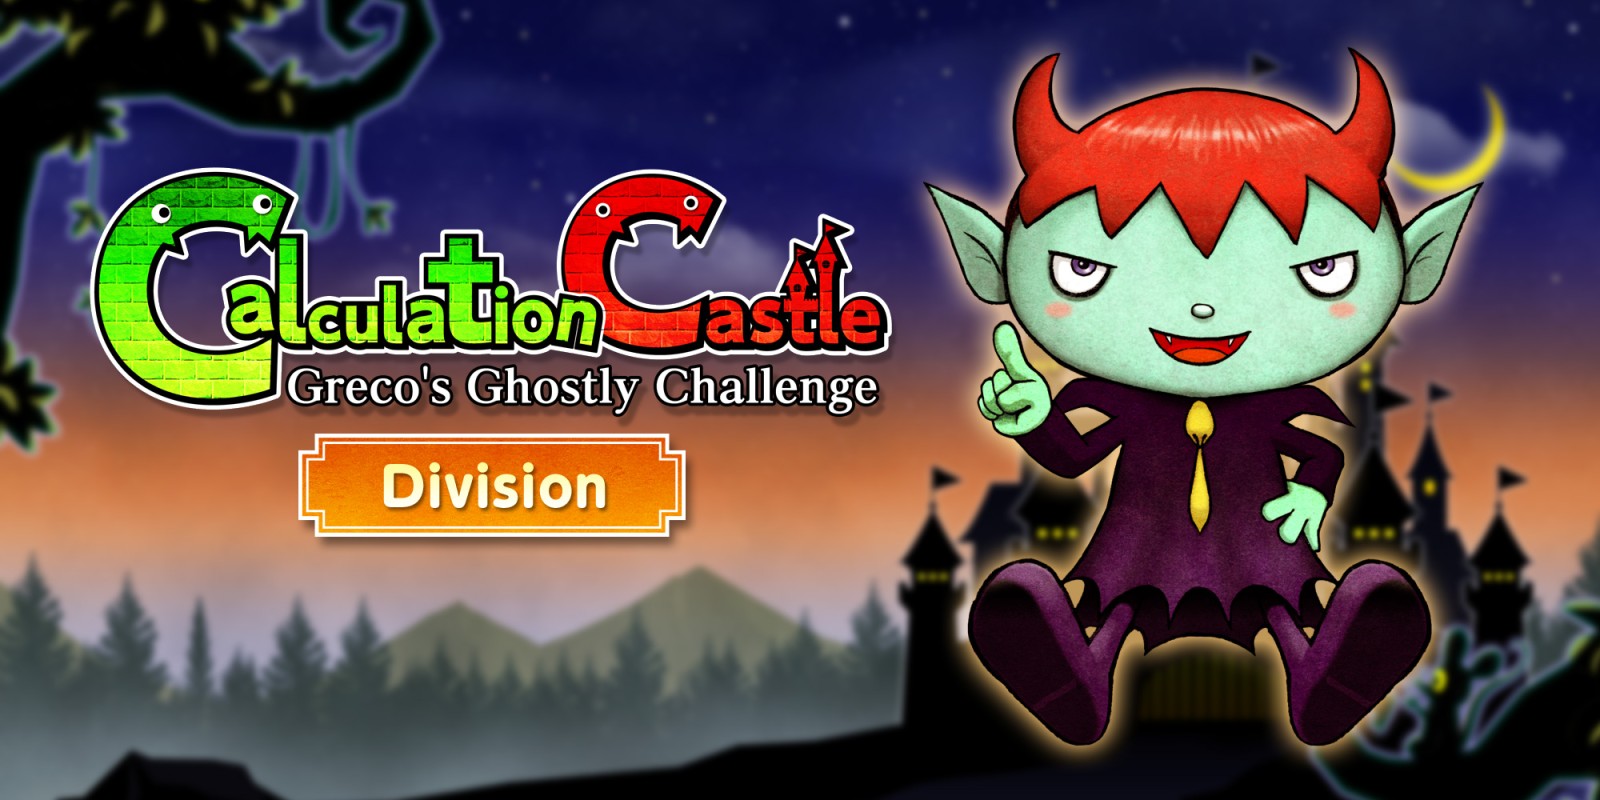 Calculation Castle : Greco's Ghostly Challenge "Division"